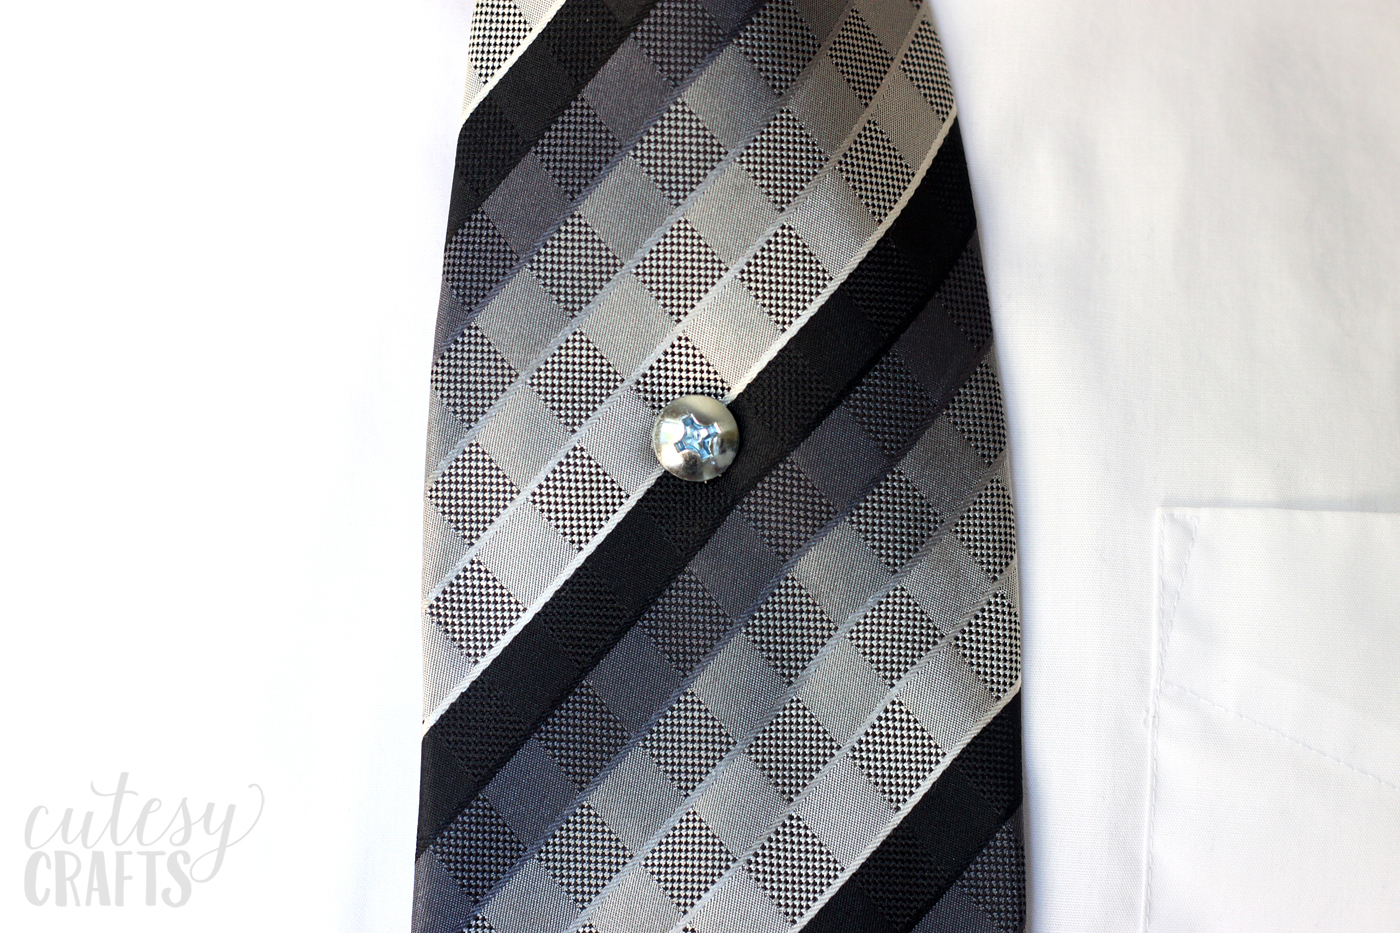 Turn a screw into the coolest tie tack ever - it's easy! Great for any guy that wants to make a statement. This is the perfect gift for Father's Day. 